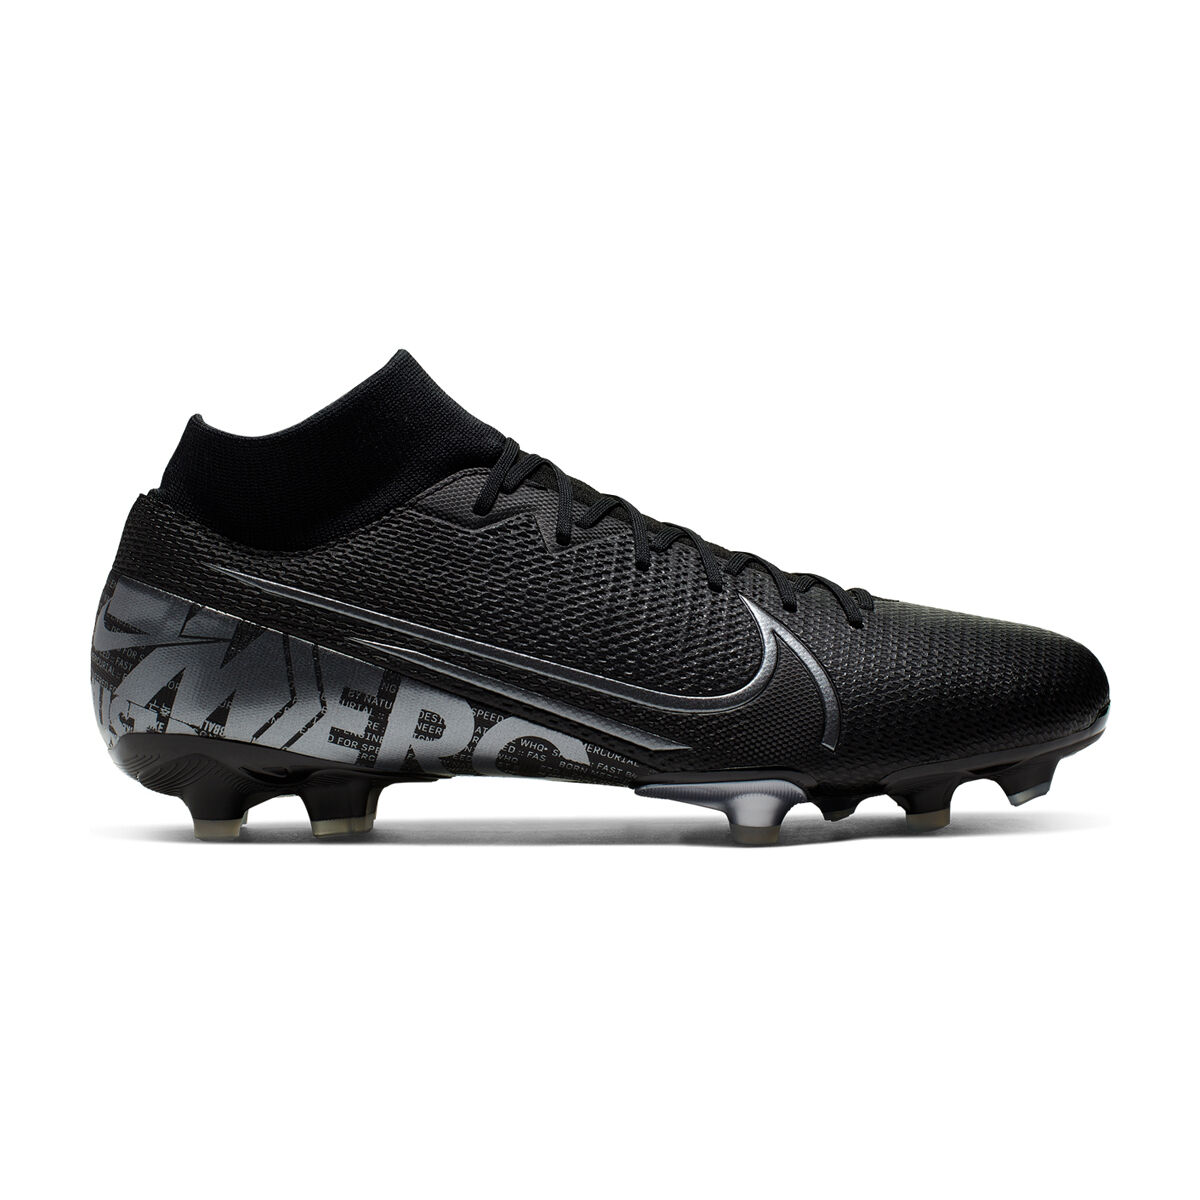 Nike Mercurial Superfly 7 Pro FG $ 149.95 $ 111.99 Runners.